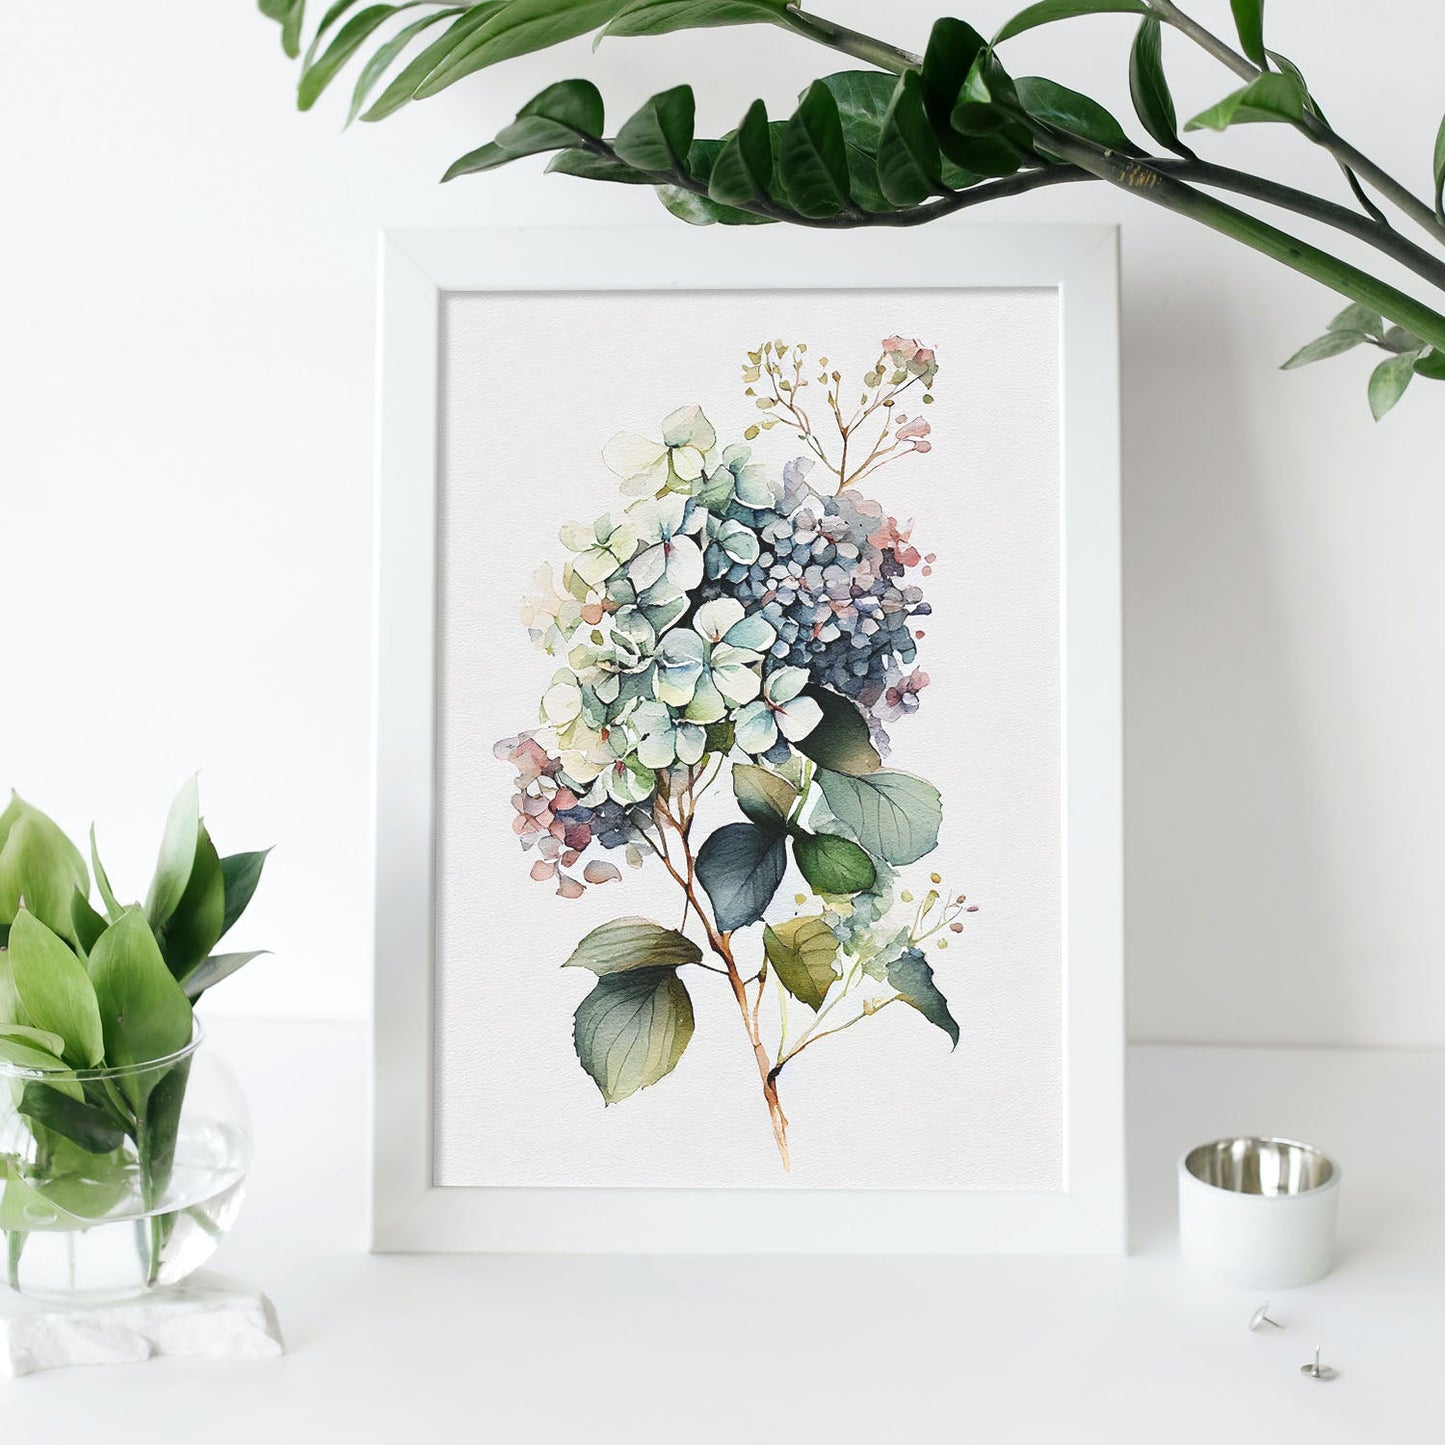 Nacnic watercolor minmal Hydrangea_1. Aesthetic Wall Art Prints for Bedroom or Living Room Design.